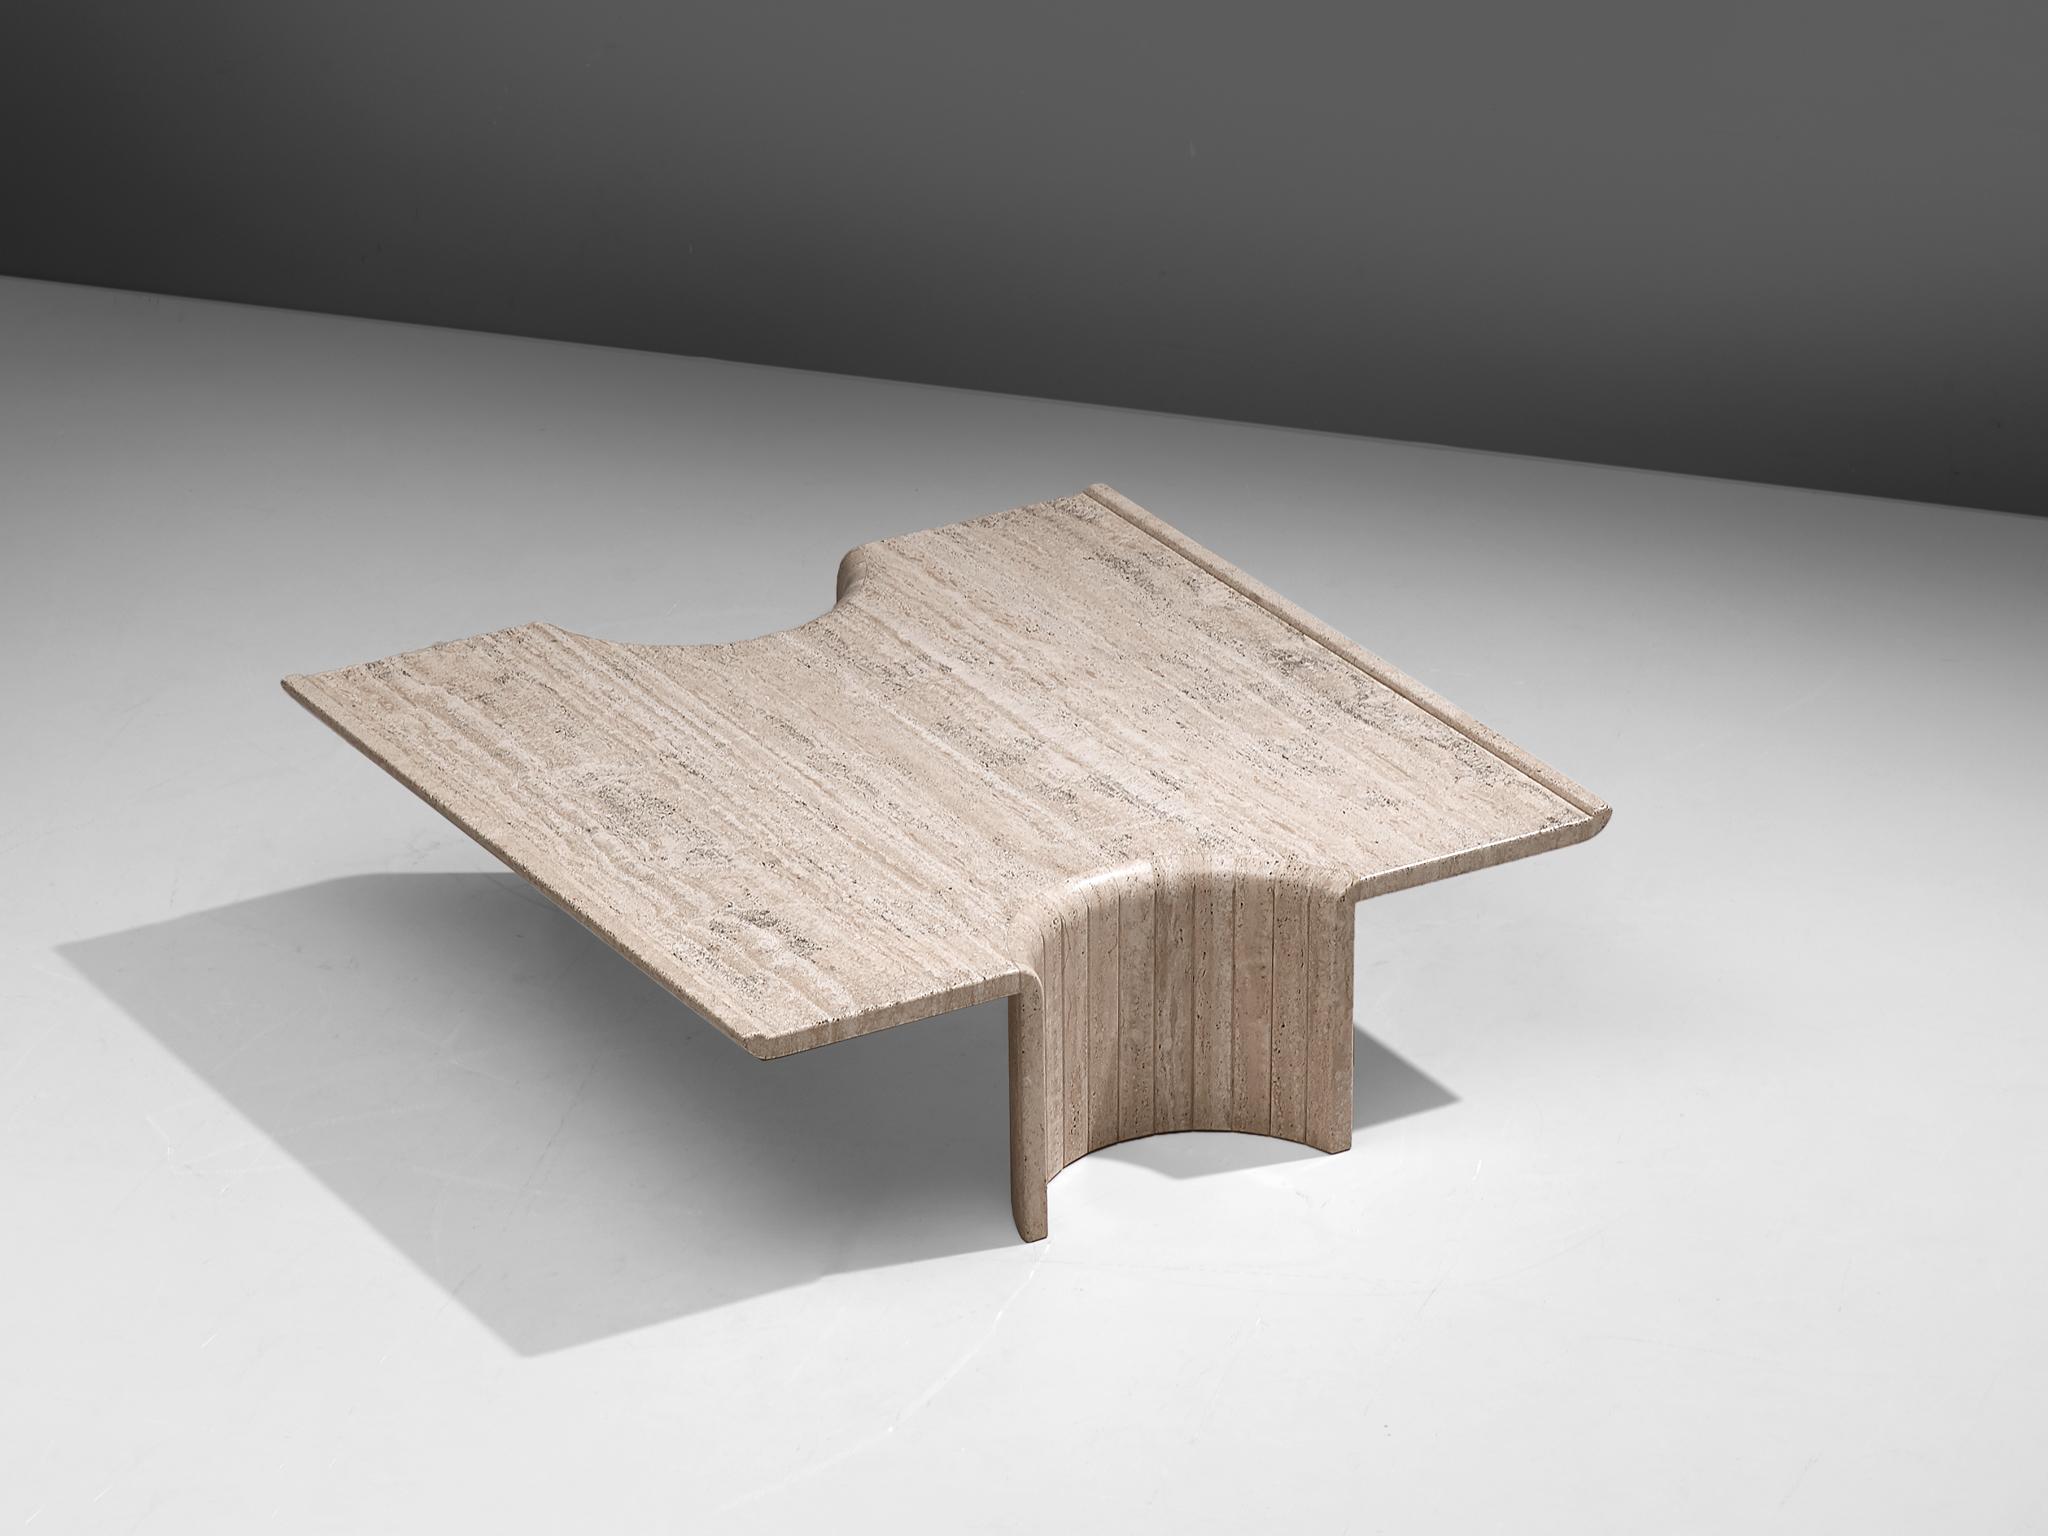 Square coffee table, travertine, Europe, 1970s.

This strong design coffee table features a square table top with half cylindrical legs. The legs are hollow, giving this table an architectural appearance. Special about this this is that fact that